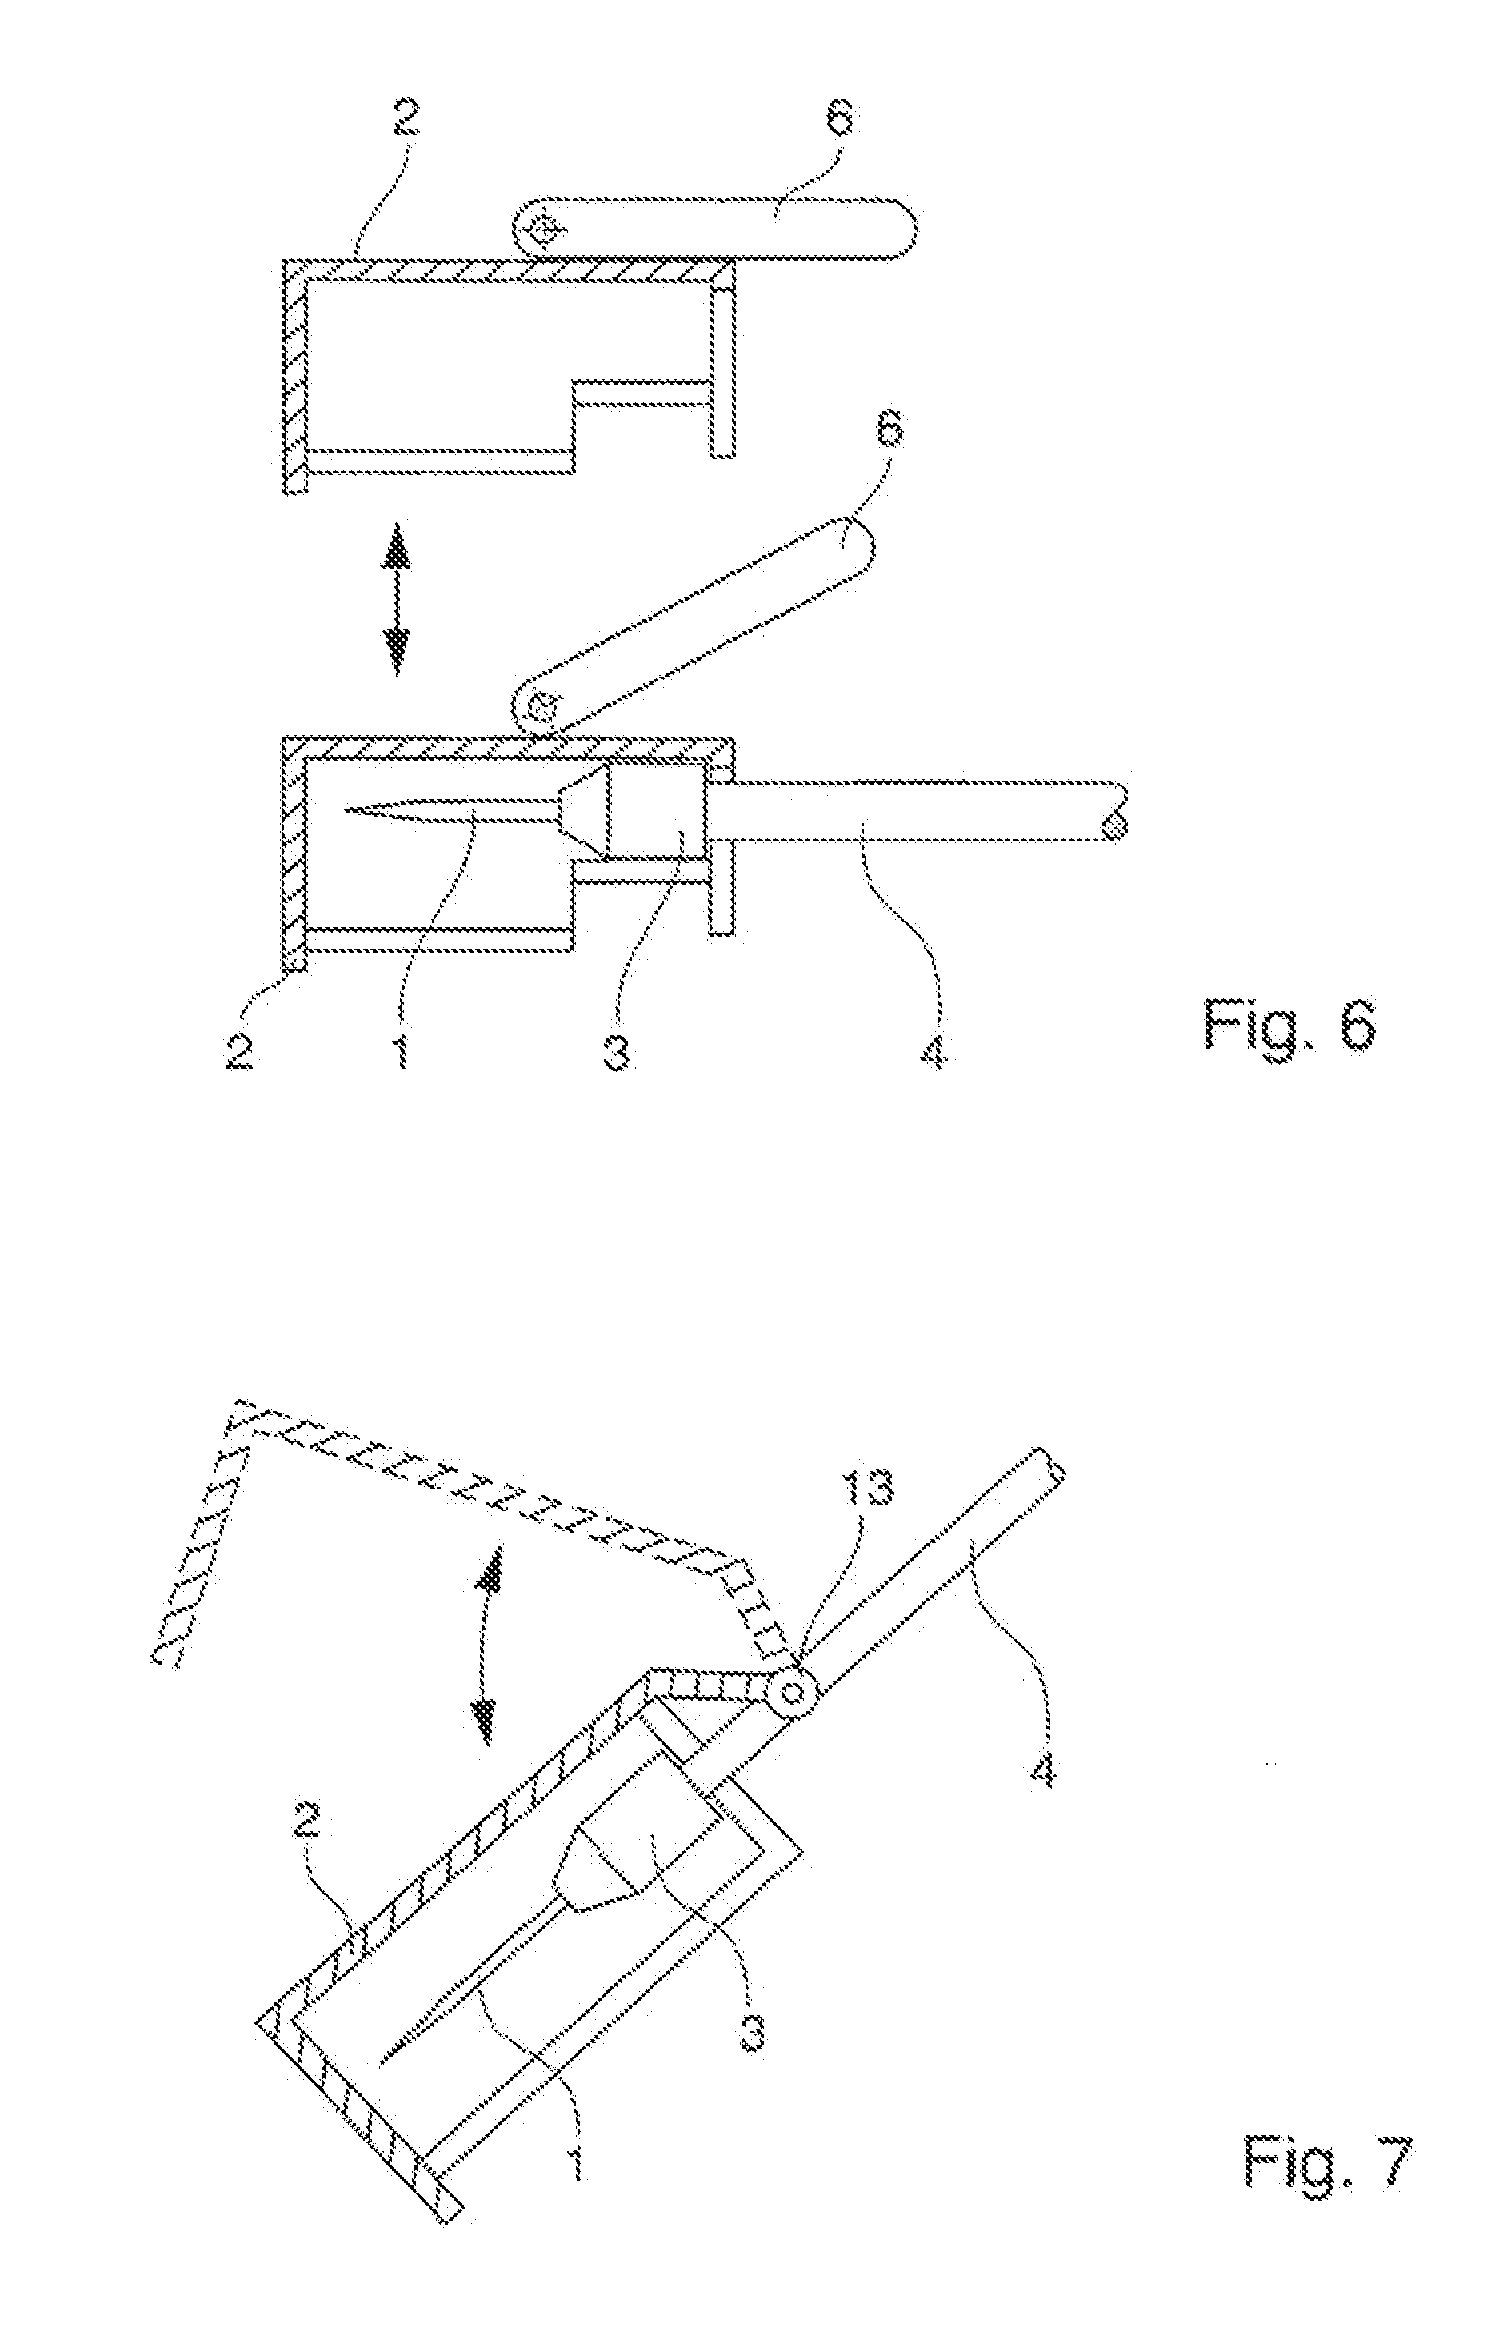 Micromanipulation system comprising a protective system for capillaries